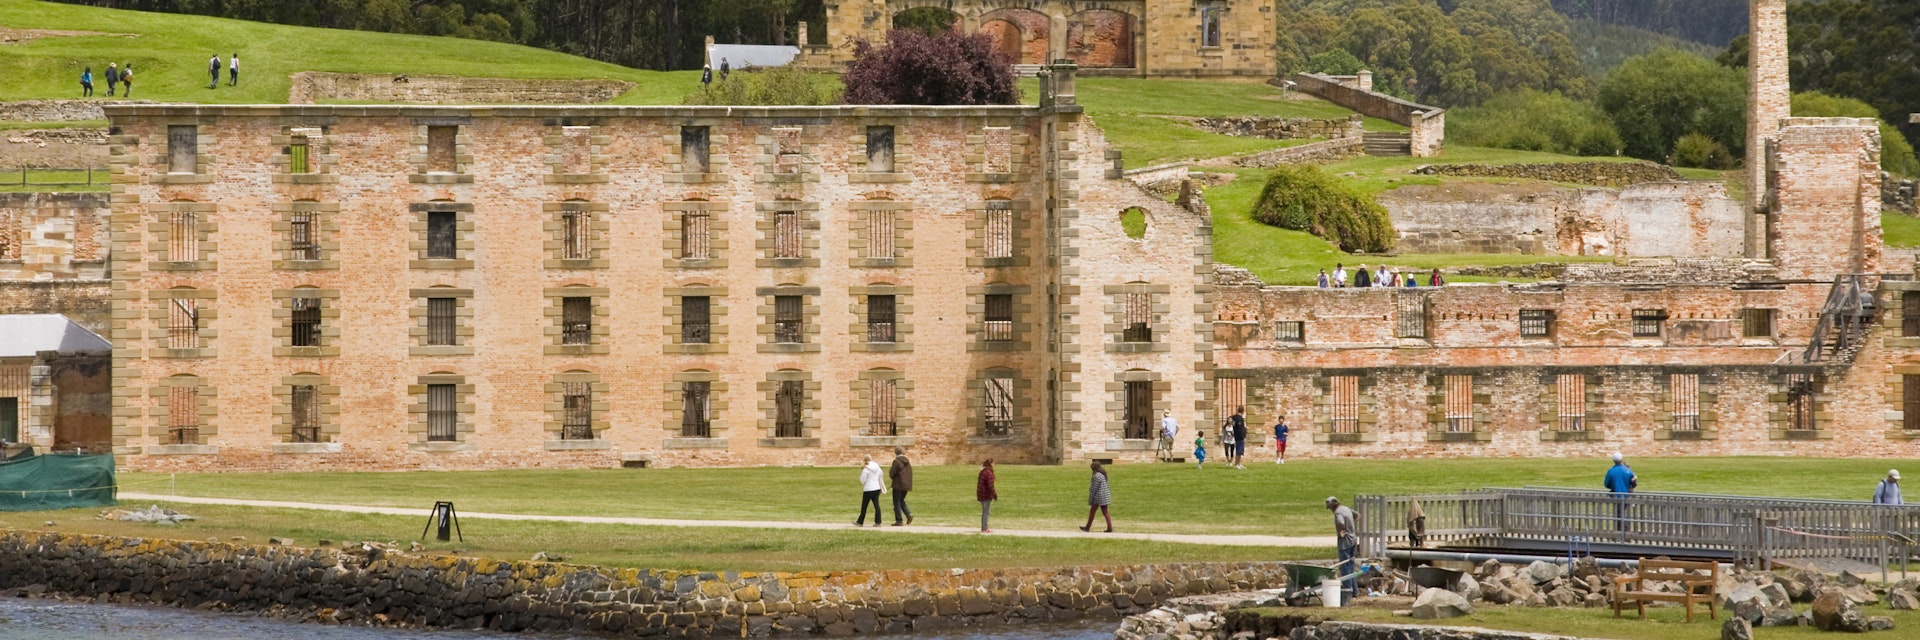 Ruins of the Penitentiary at Port Arthur